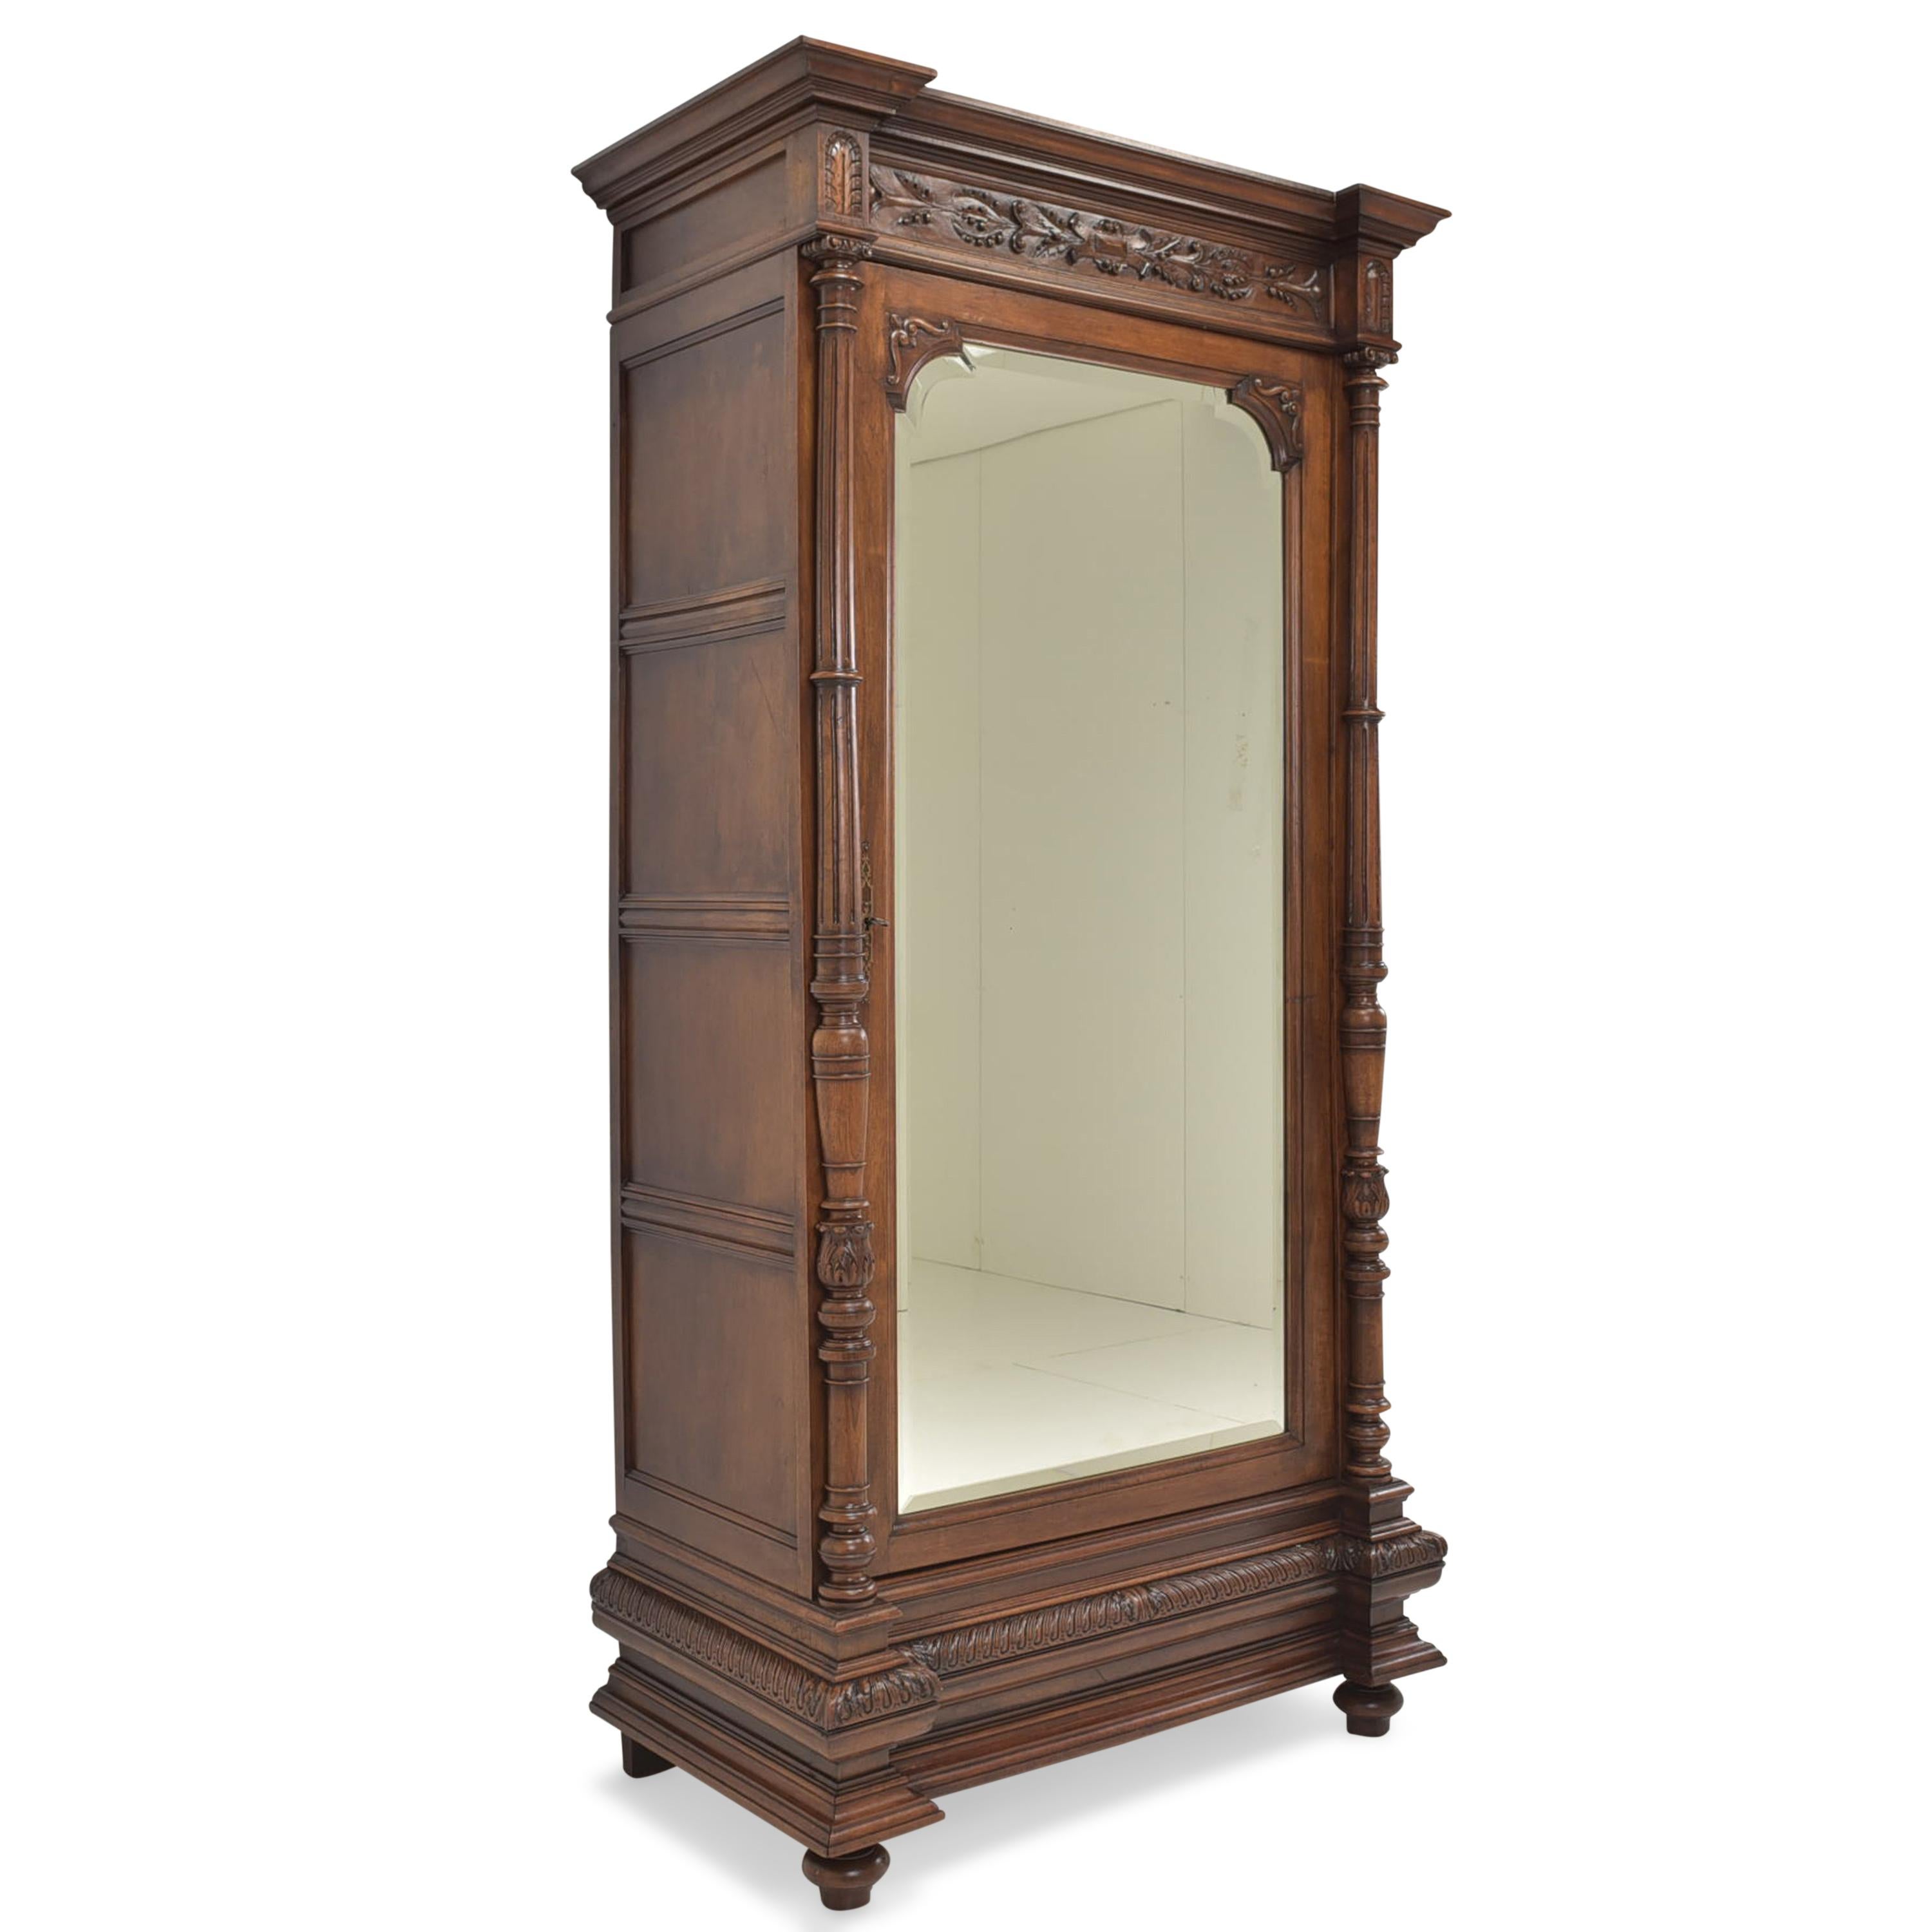 One-door wardrobe restored Wilhelminian walnut hallway wardrobe, 1890

Features:
Completely solid wood (except for mirror cover inside)
Solid walnut body, solid oak inside
Single-door model with mirror and three shelves
High quality
Solid oak